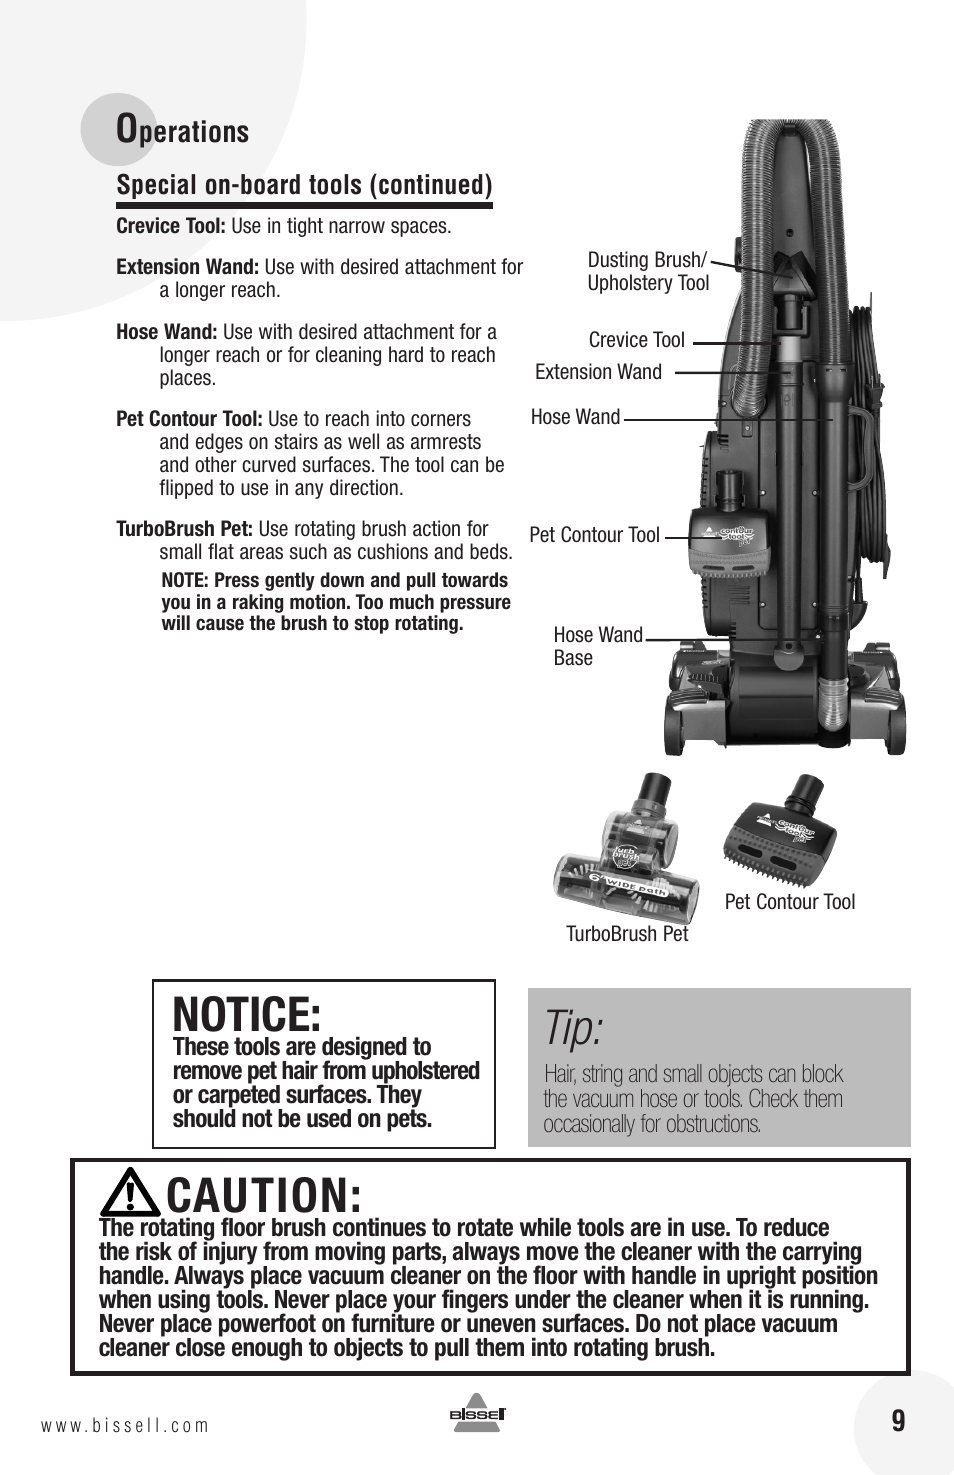 Caution, Notice | Bissell 10N6 User Manual | Page 9 / 20